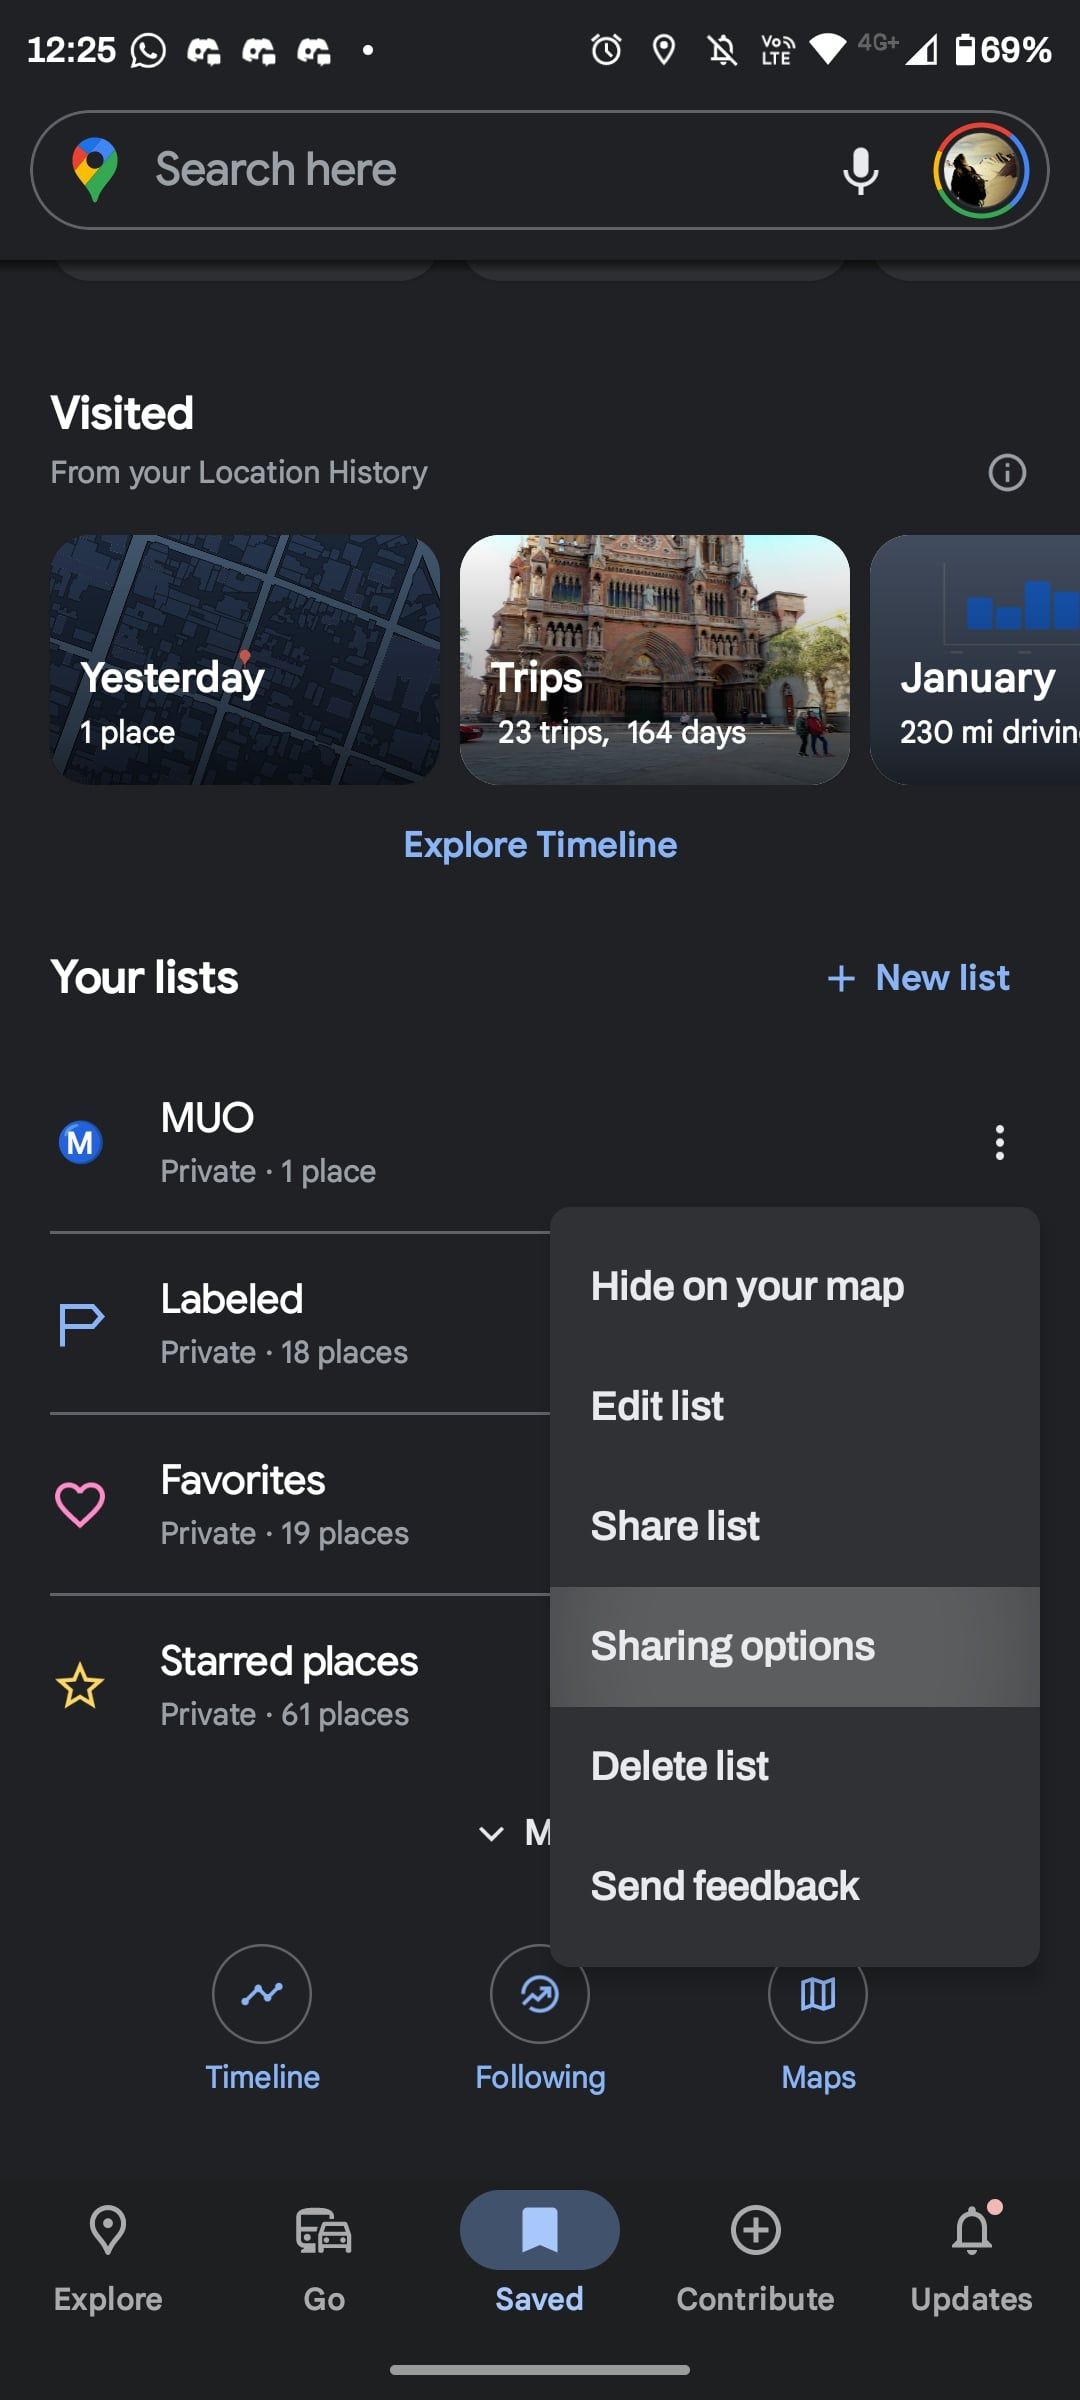 Sharing options for a list in Google Maps